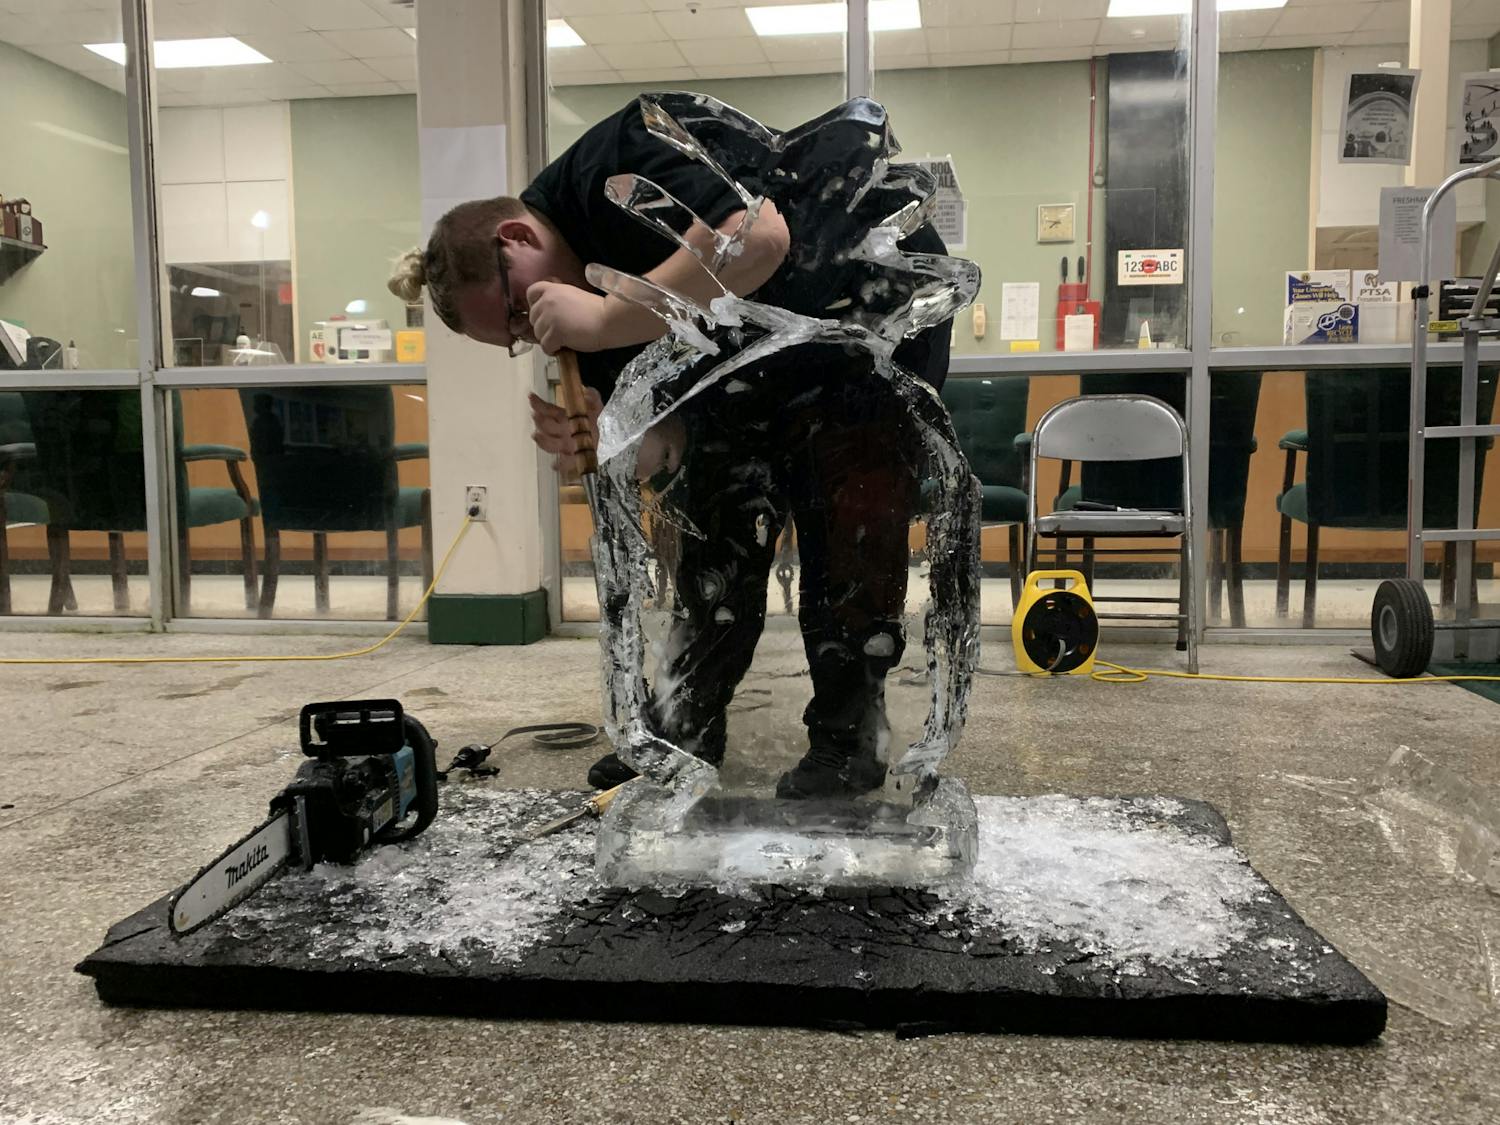 Ian Vought uses an ice pick and a chainsaw to chisel a pineapple-shaped ice sculpture during the Career Academy Showcase at Eastside High School on Thursday, Nov. 18, 2021.